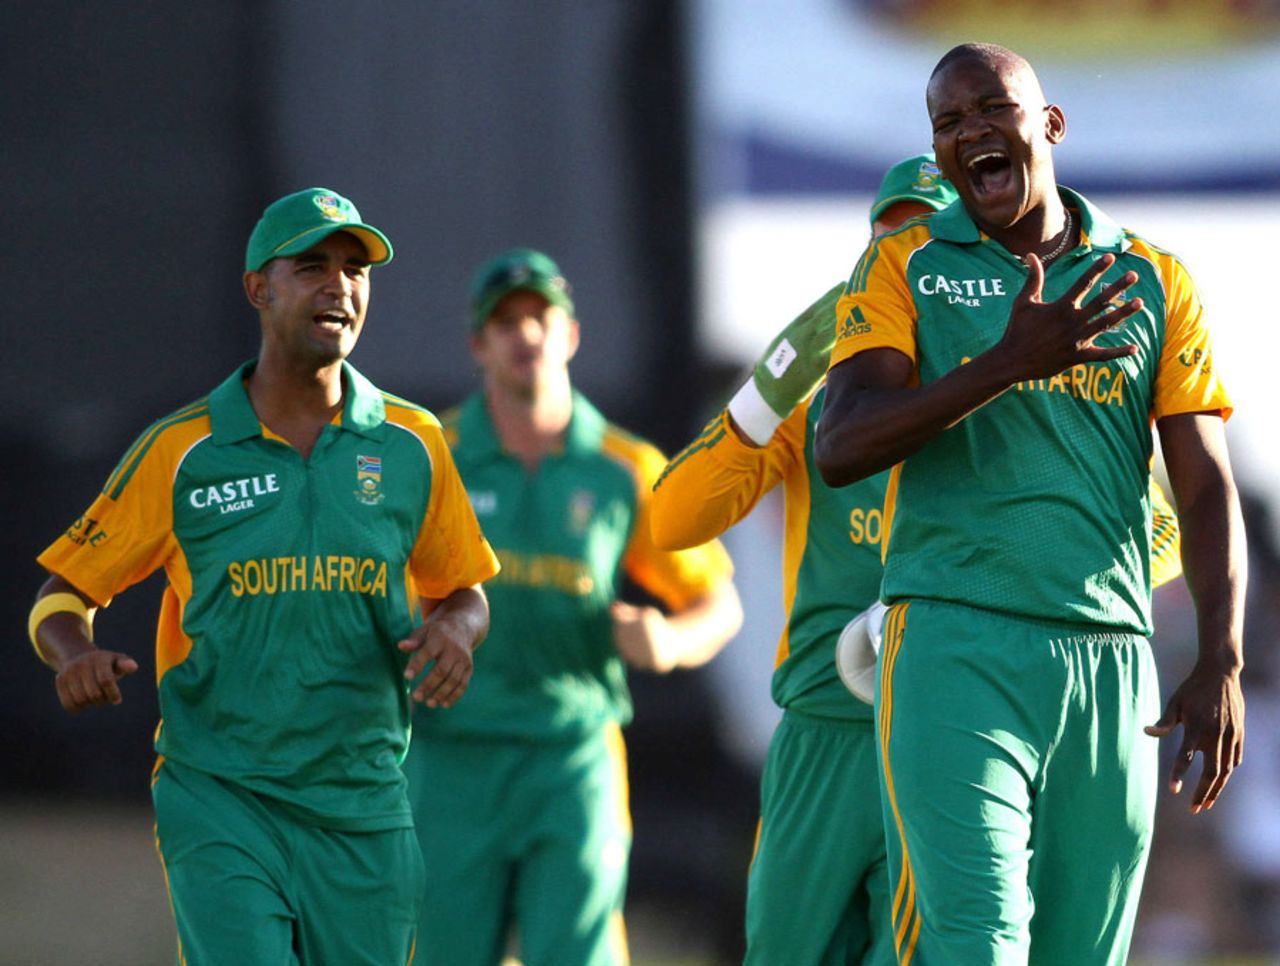 Lonwabo Tsotsobe made a strong return to the South African side, South Africa v Sri Lanka, 1st ODI, Paarl, January 11, 2012